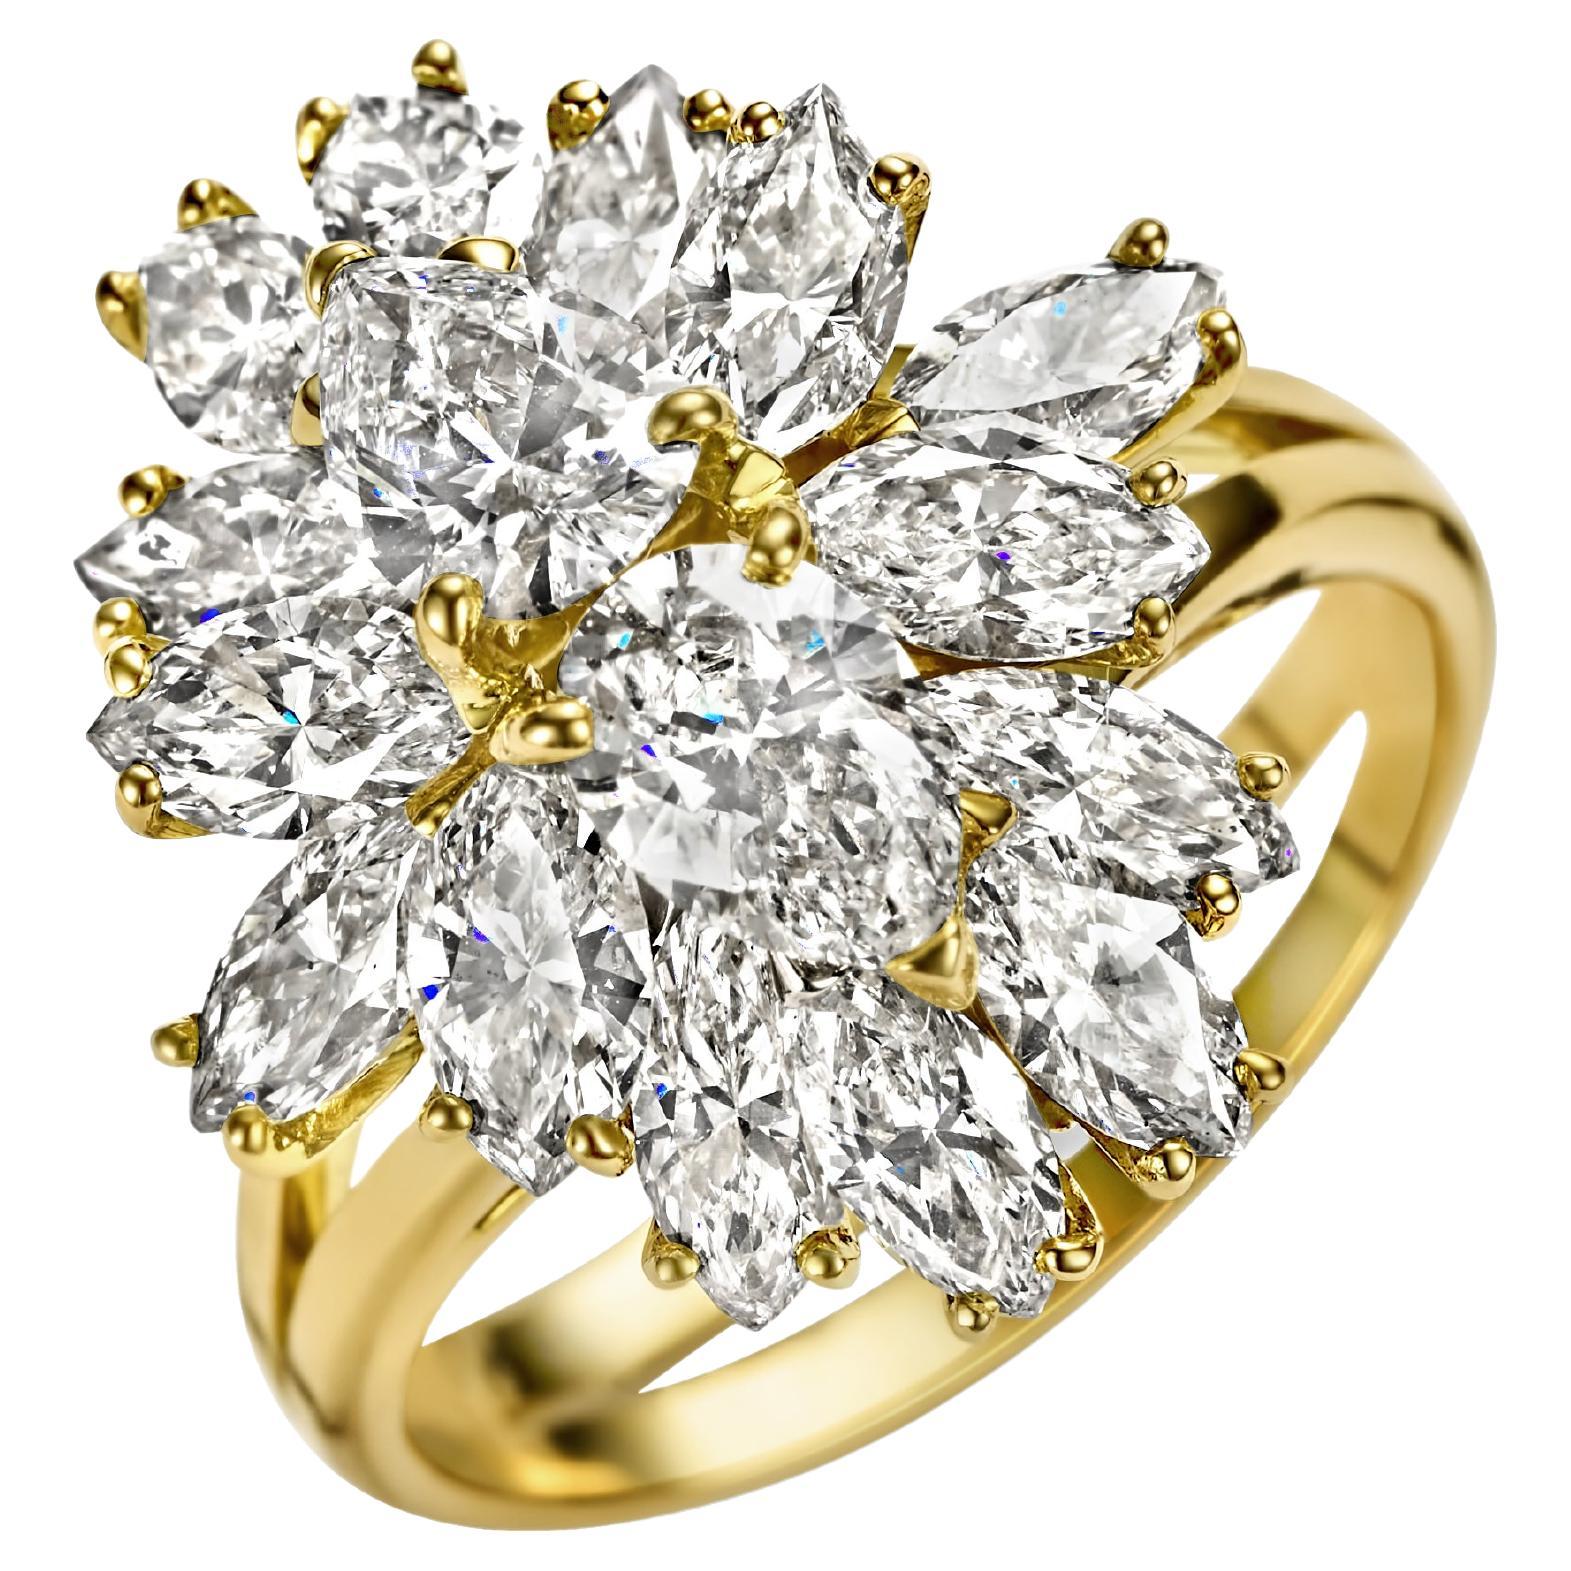 Asprey London 18kt. Yellow Gold Ring With 3.23 ct. Pear & Marquise Cut Diamonds